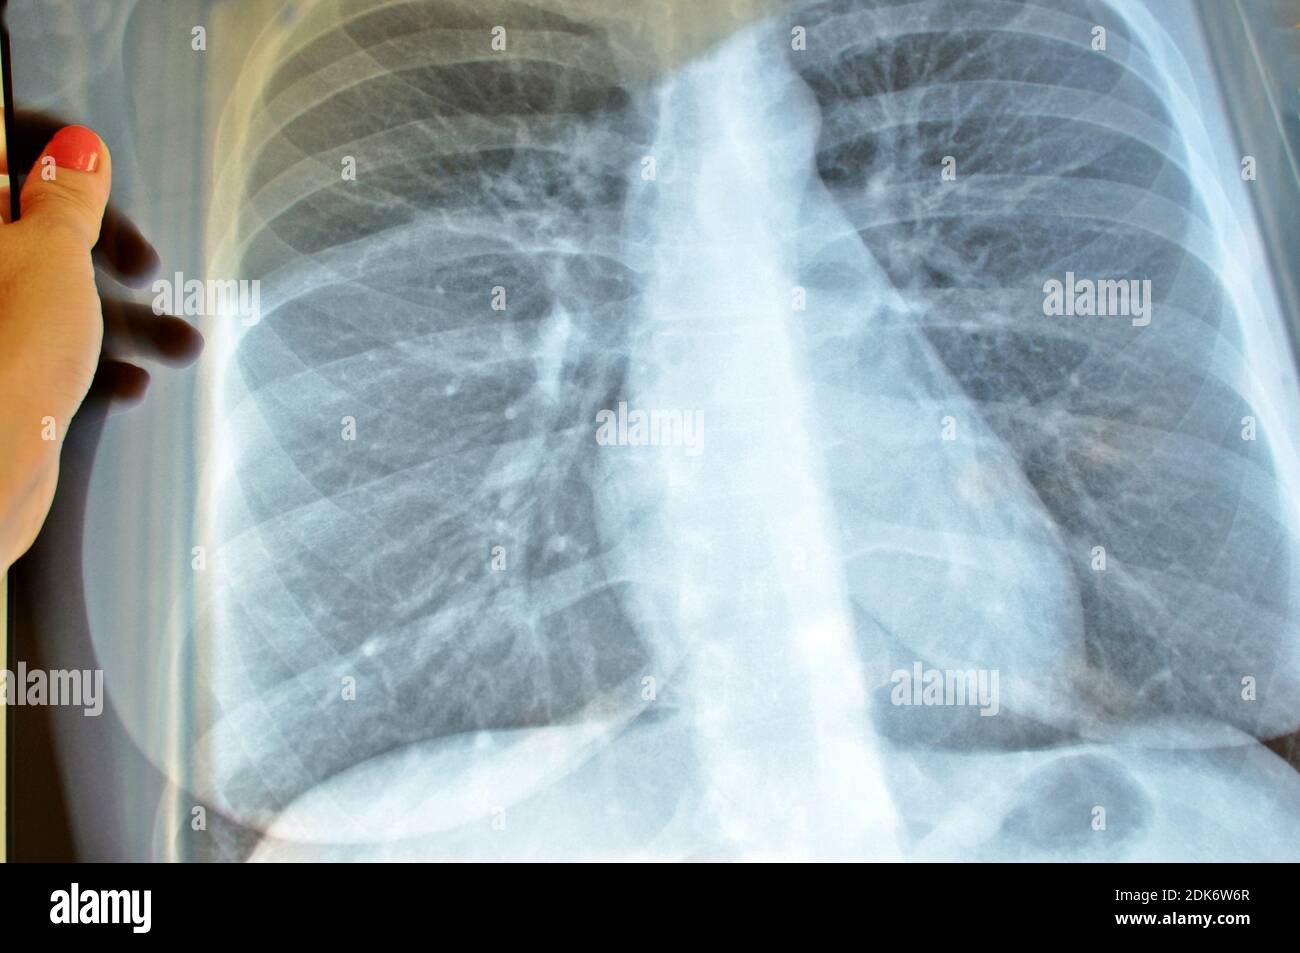 Doctor hands holding a lungs radiography image scan. x-ray film chest or lung of patient for medical diagnose. Pulmonary  medicine exam, science. Stock Photo